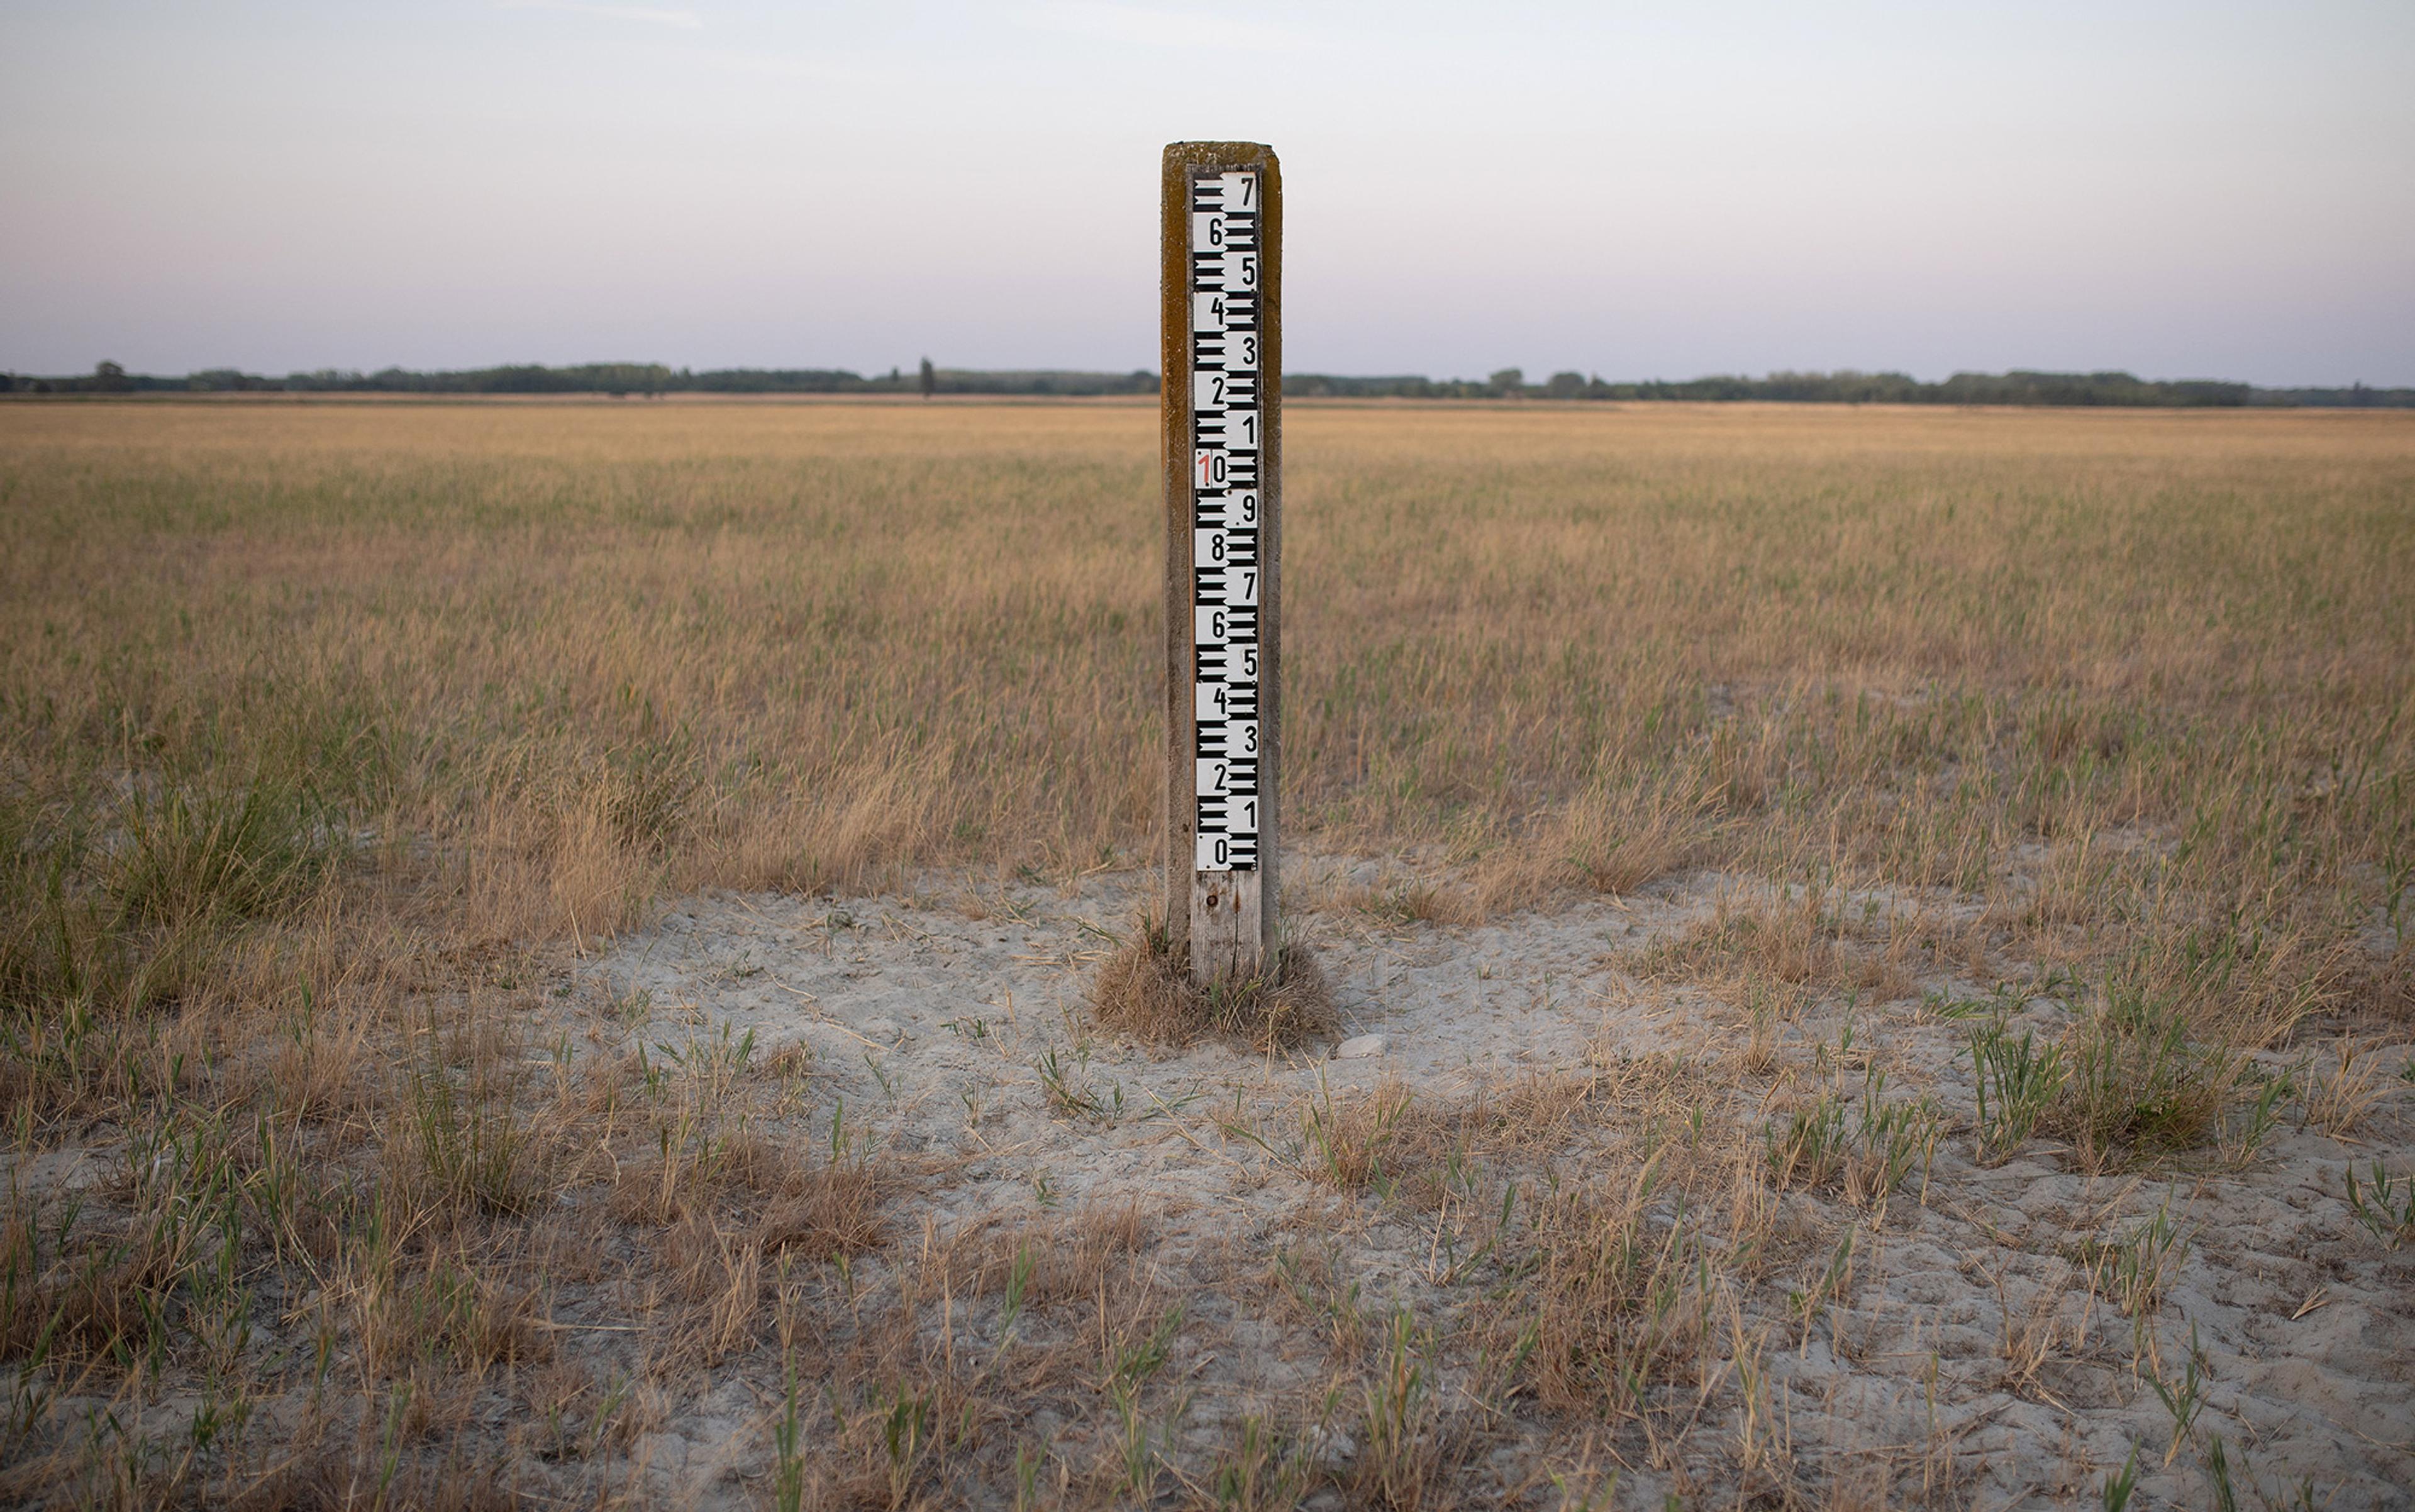 A measure for depth of water stands upright in a dried up landscape that was formerly a lake